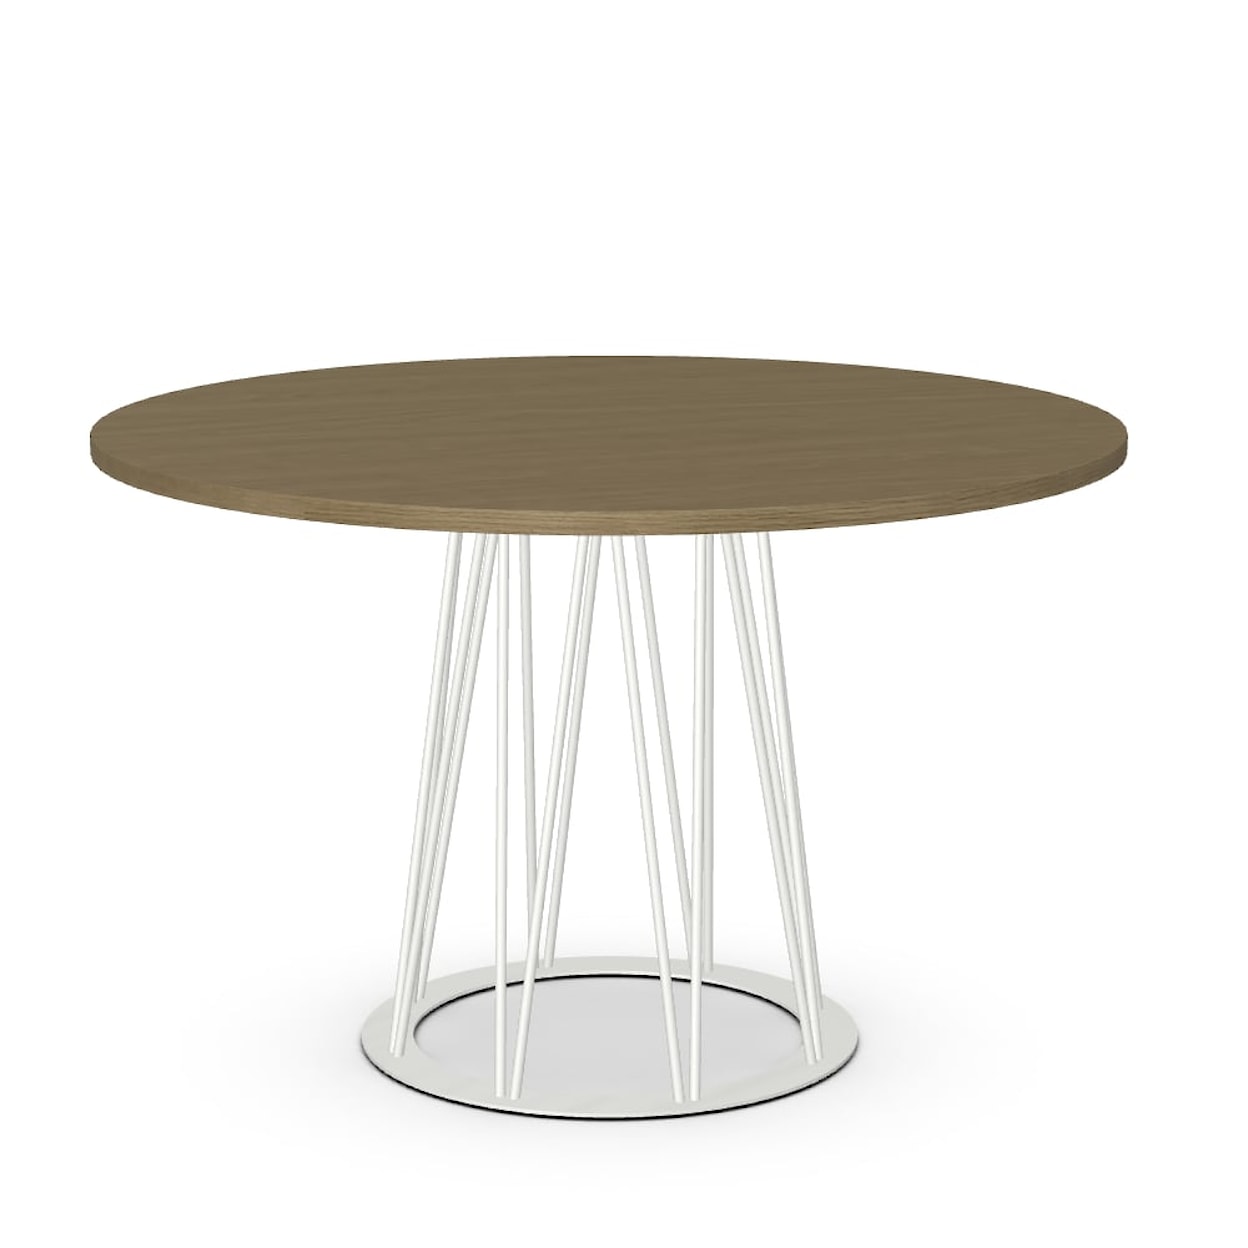 Amisco Calypso Dining Table with Round TFL Top